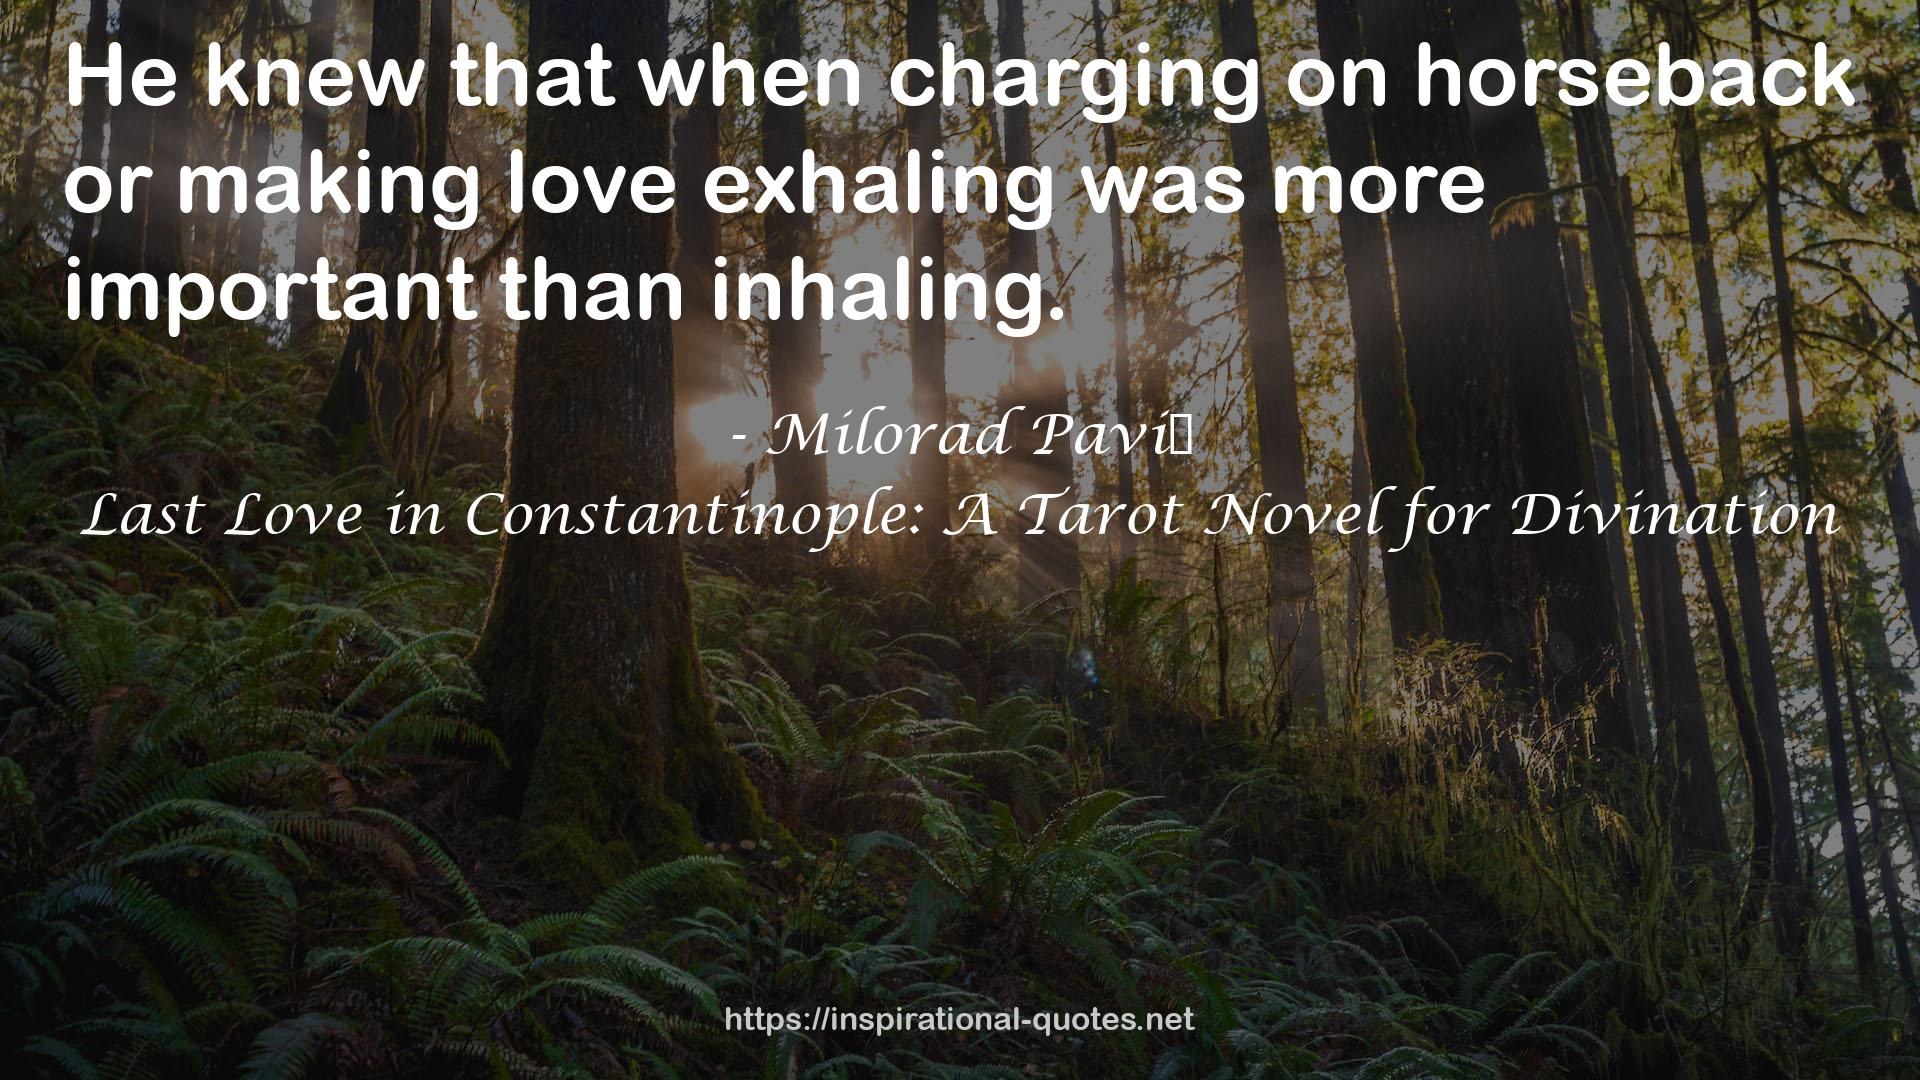 Last Love in Constantinople: A Tarot Novel for Divination QUOTES